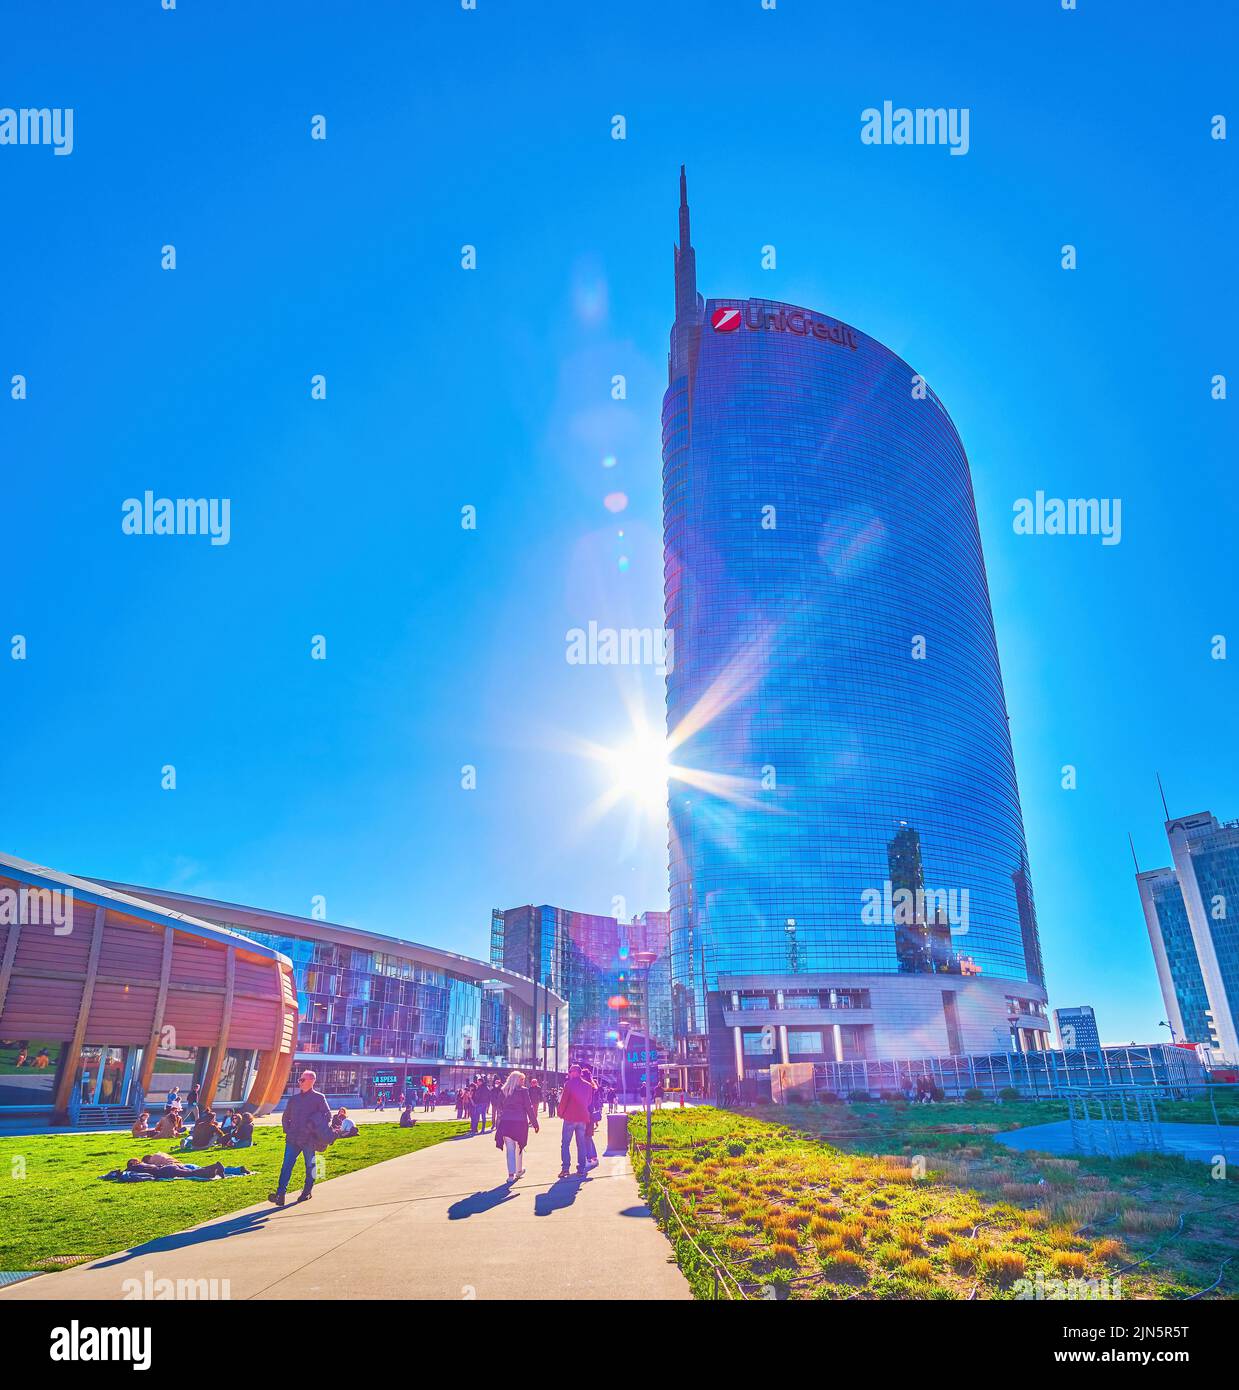 MILAN, ITALY - APRIL 9, 2022: Enjoy pleasant evening hours among modern buildings of Piazza Gae Aulenti complex, on April 9 in Milan, Italy Stock Photo